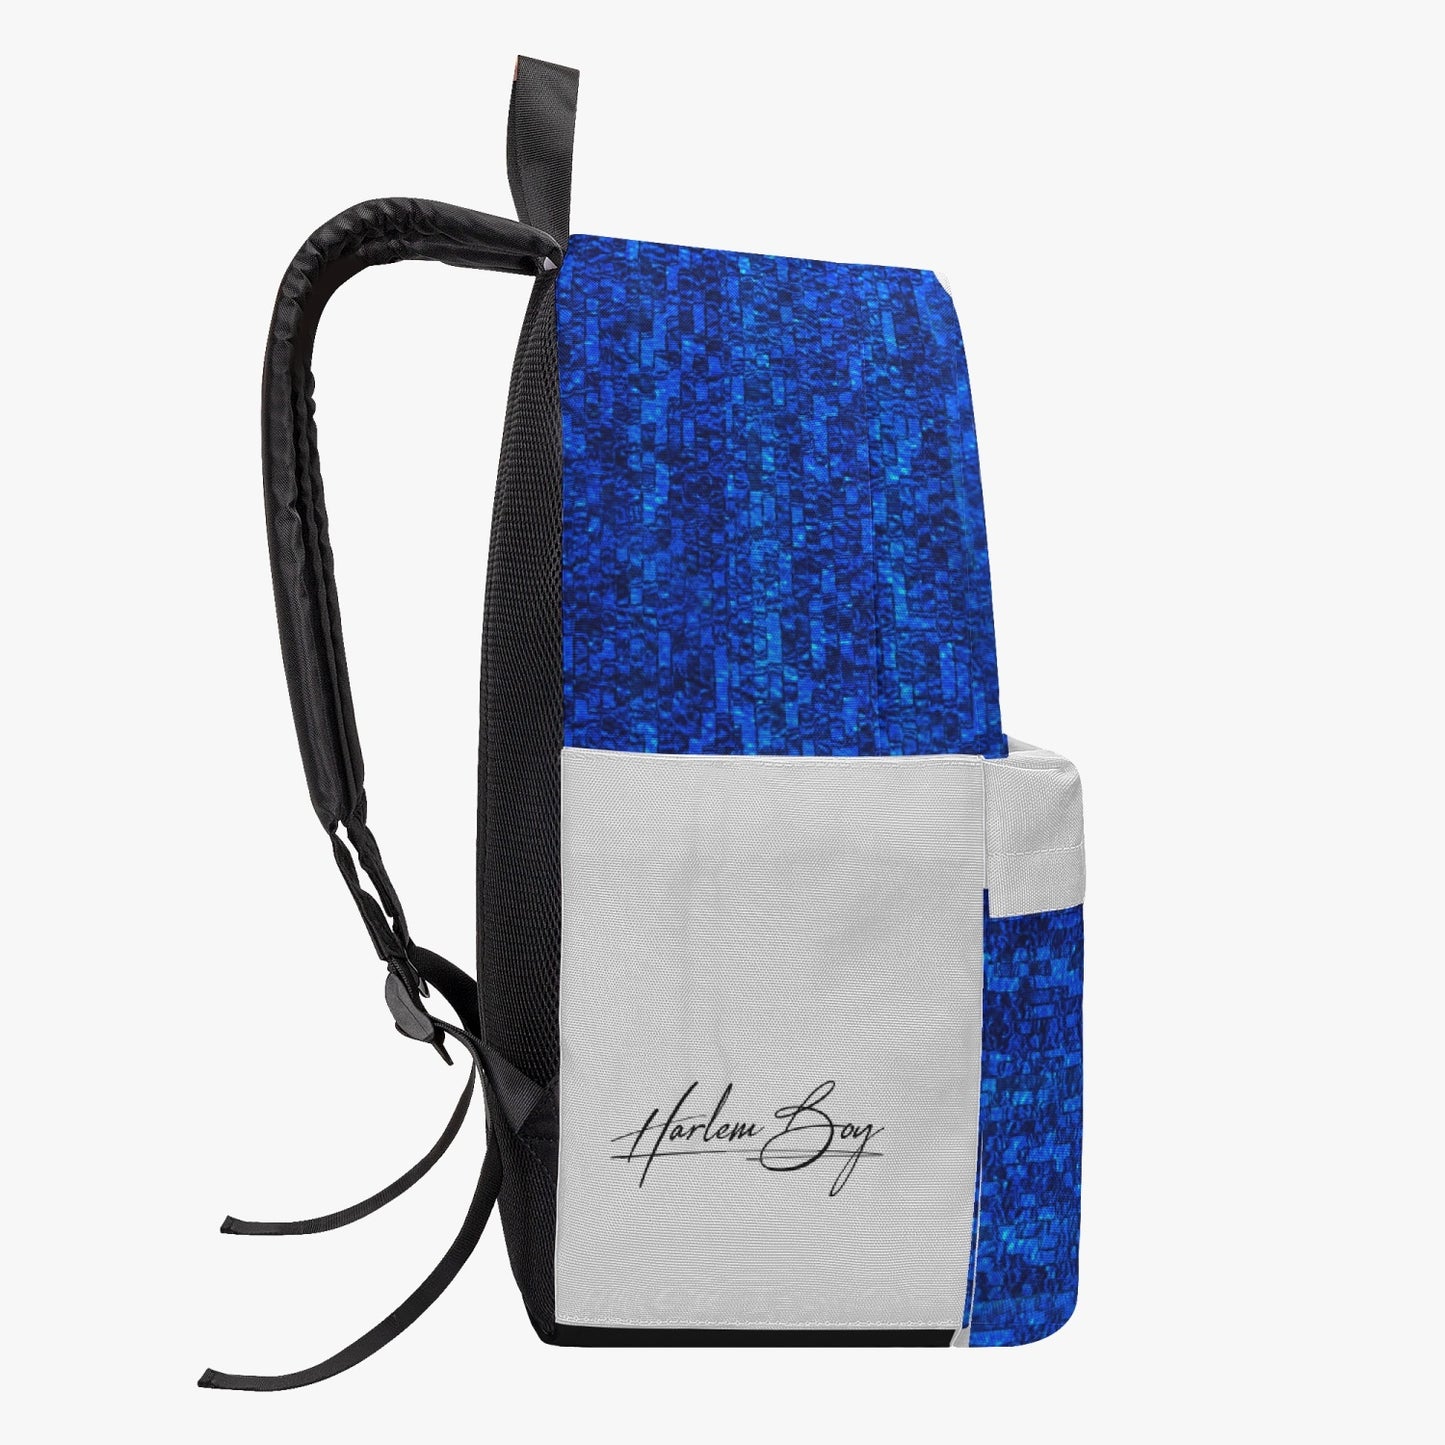 Harlem Boy Collection Backpack - Electric Kiss - Sapphire